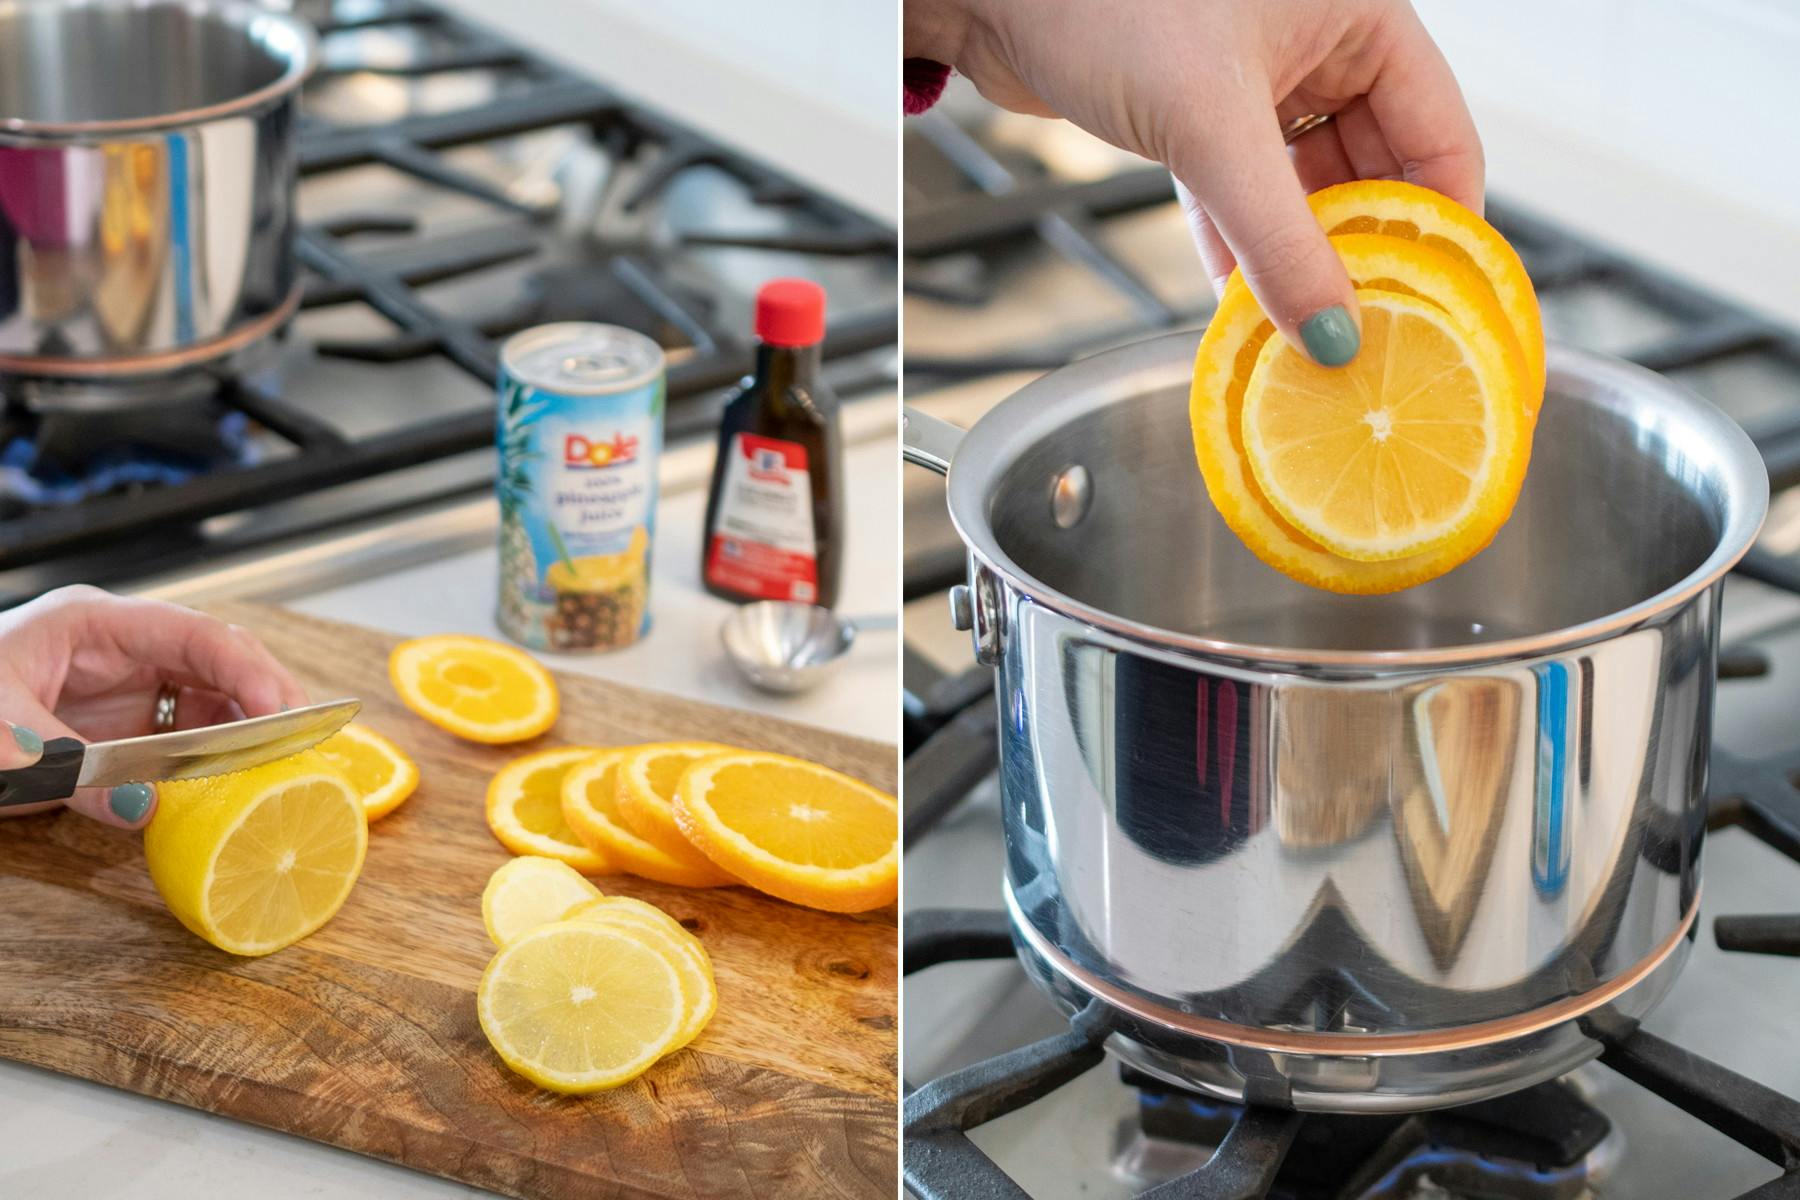 Someone slicing oranges and placing slices in a pot on a stove